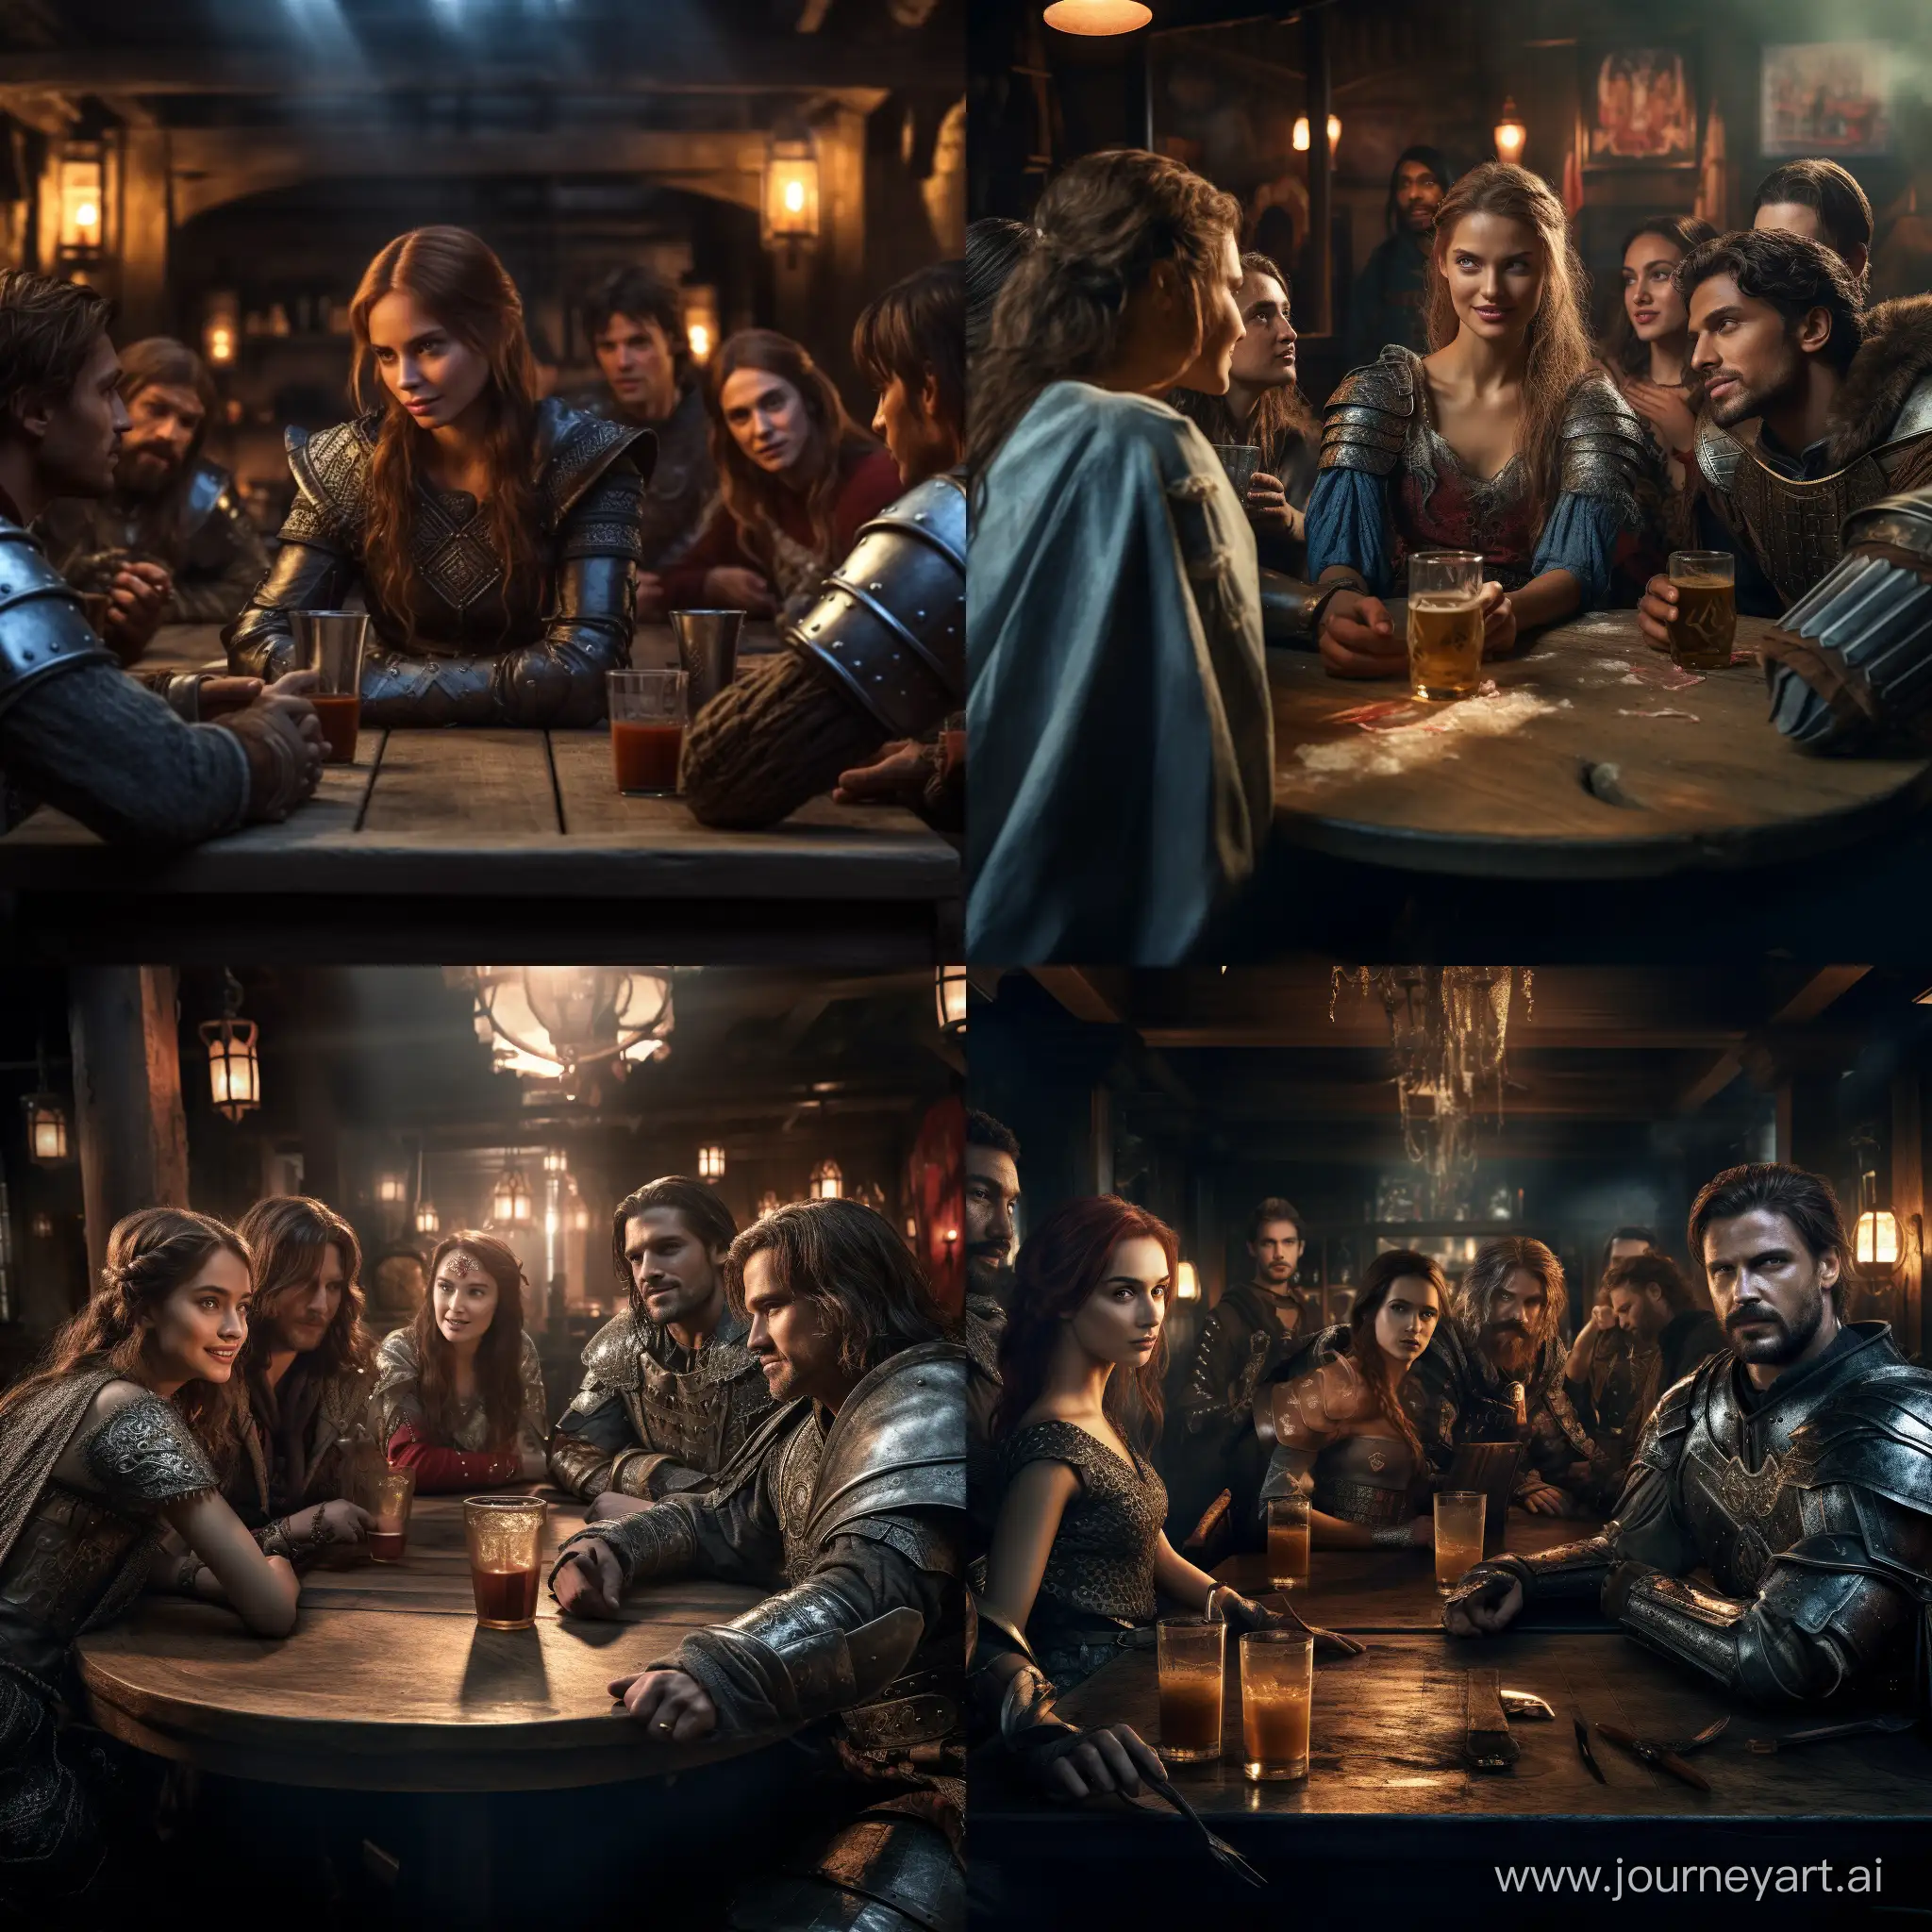 Medieval-Revelry-Ivanhoe-and-Knights-Enjoying-a-Vibrant-Night-at-the-Tavern